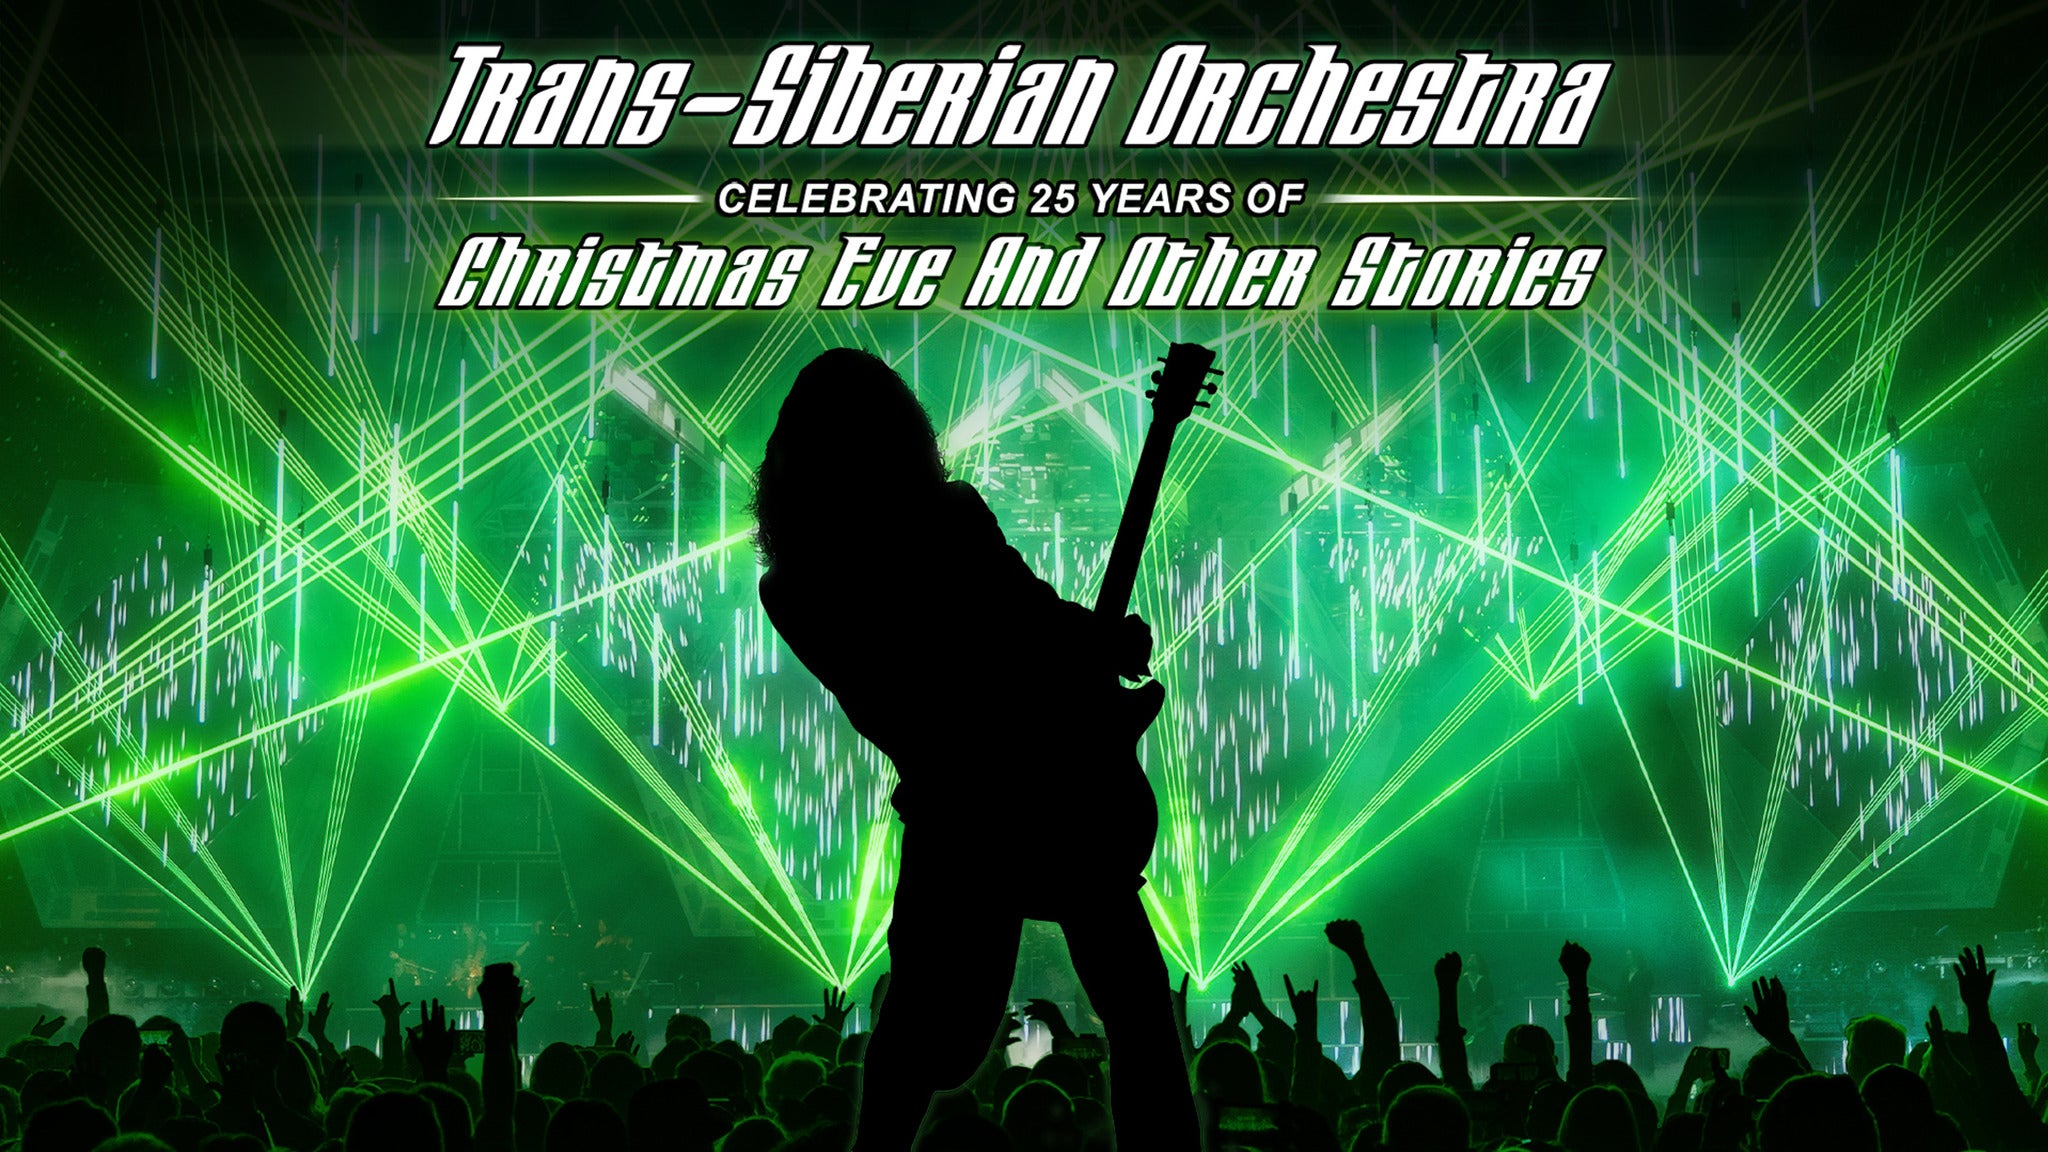 Trans-Siberian Orchestra-Christmas Eve & Other Stories in Toledo promo photo for Radio / Venue presale offer code